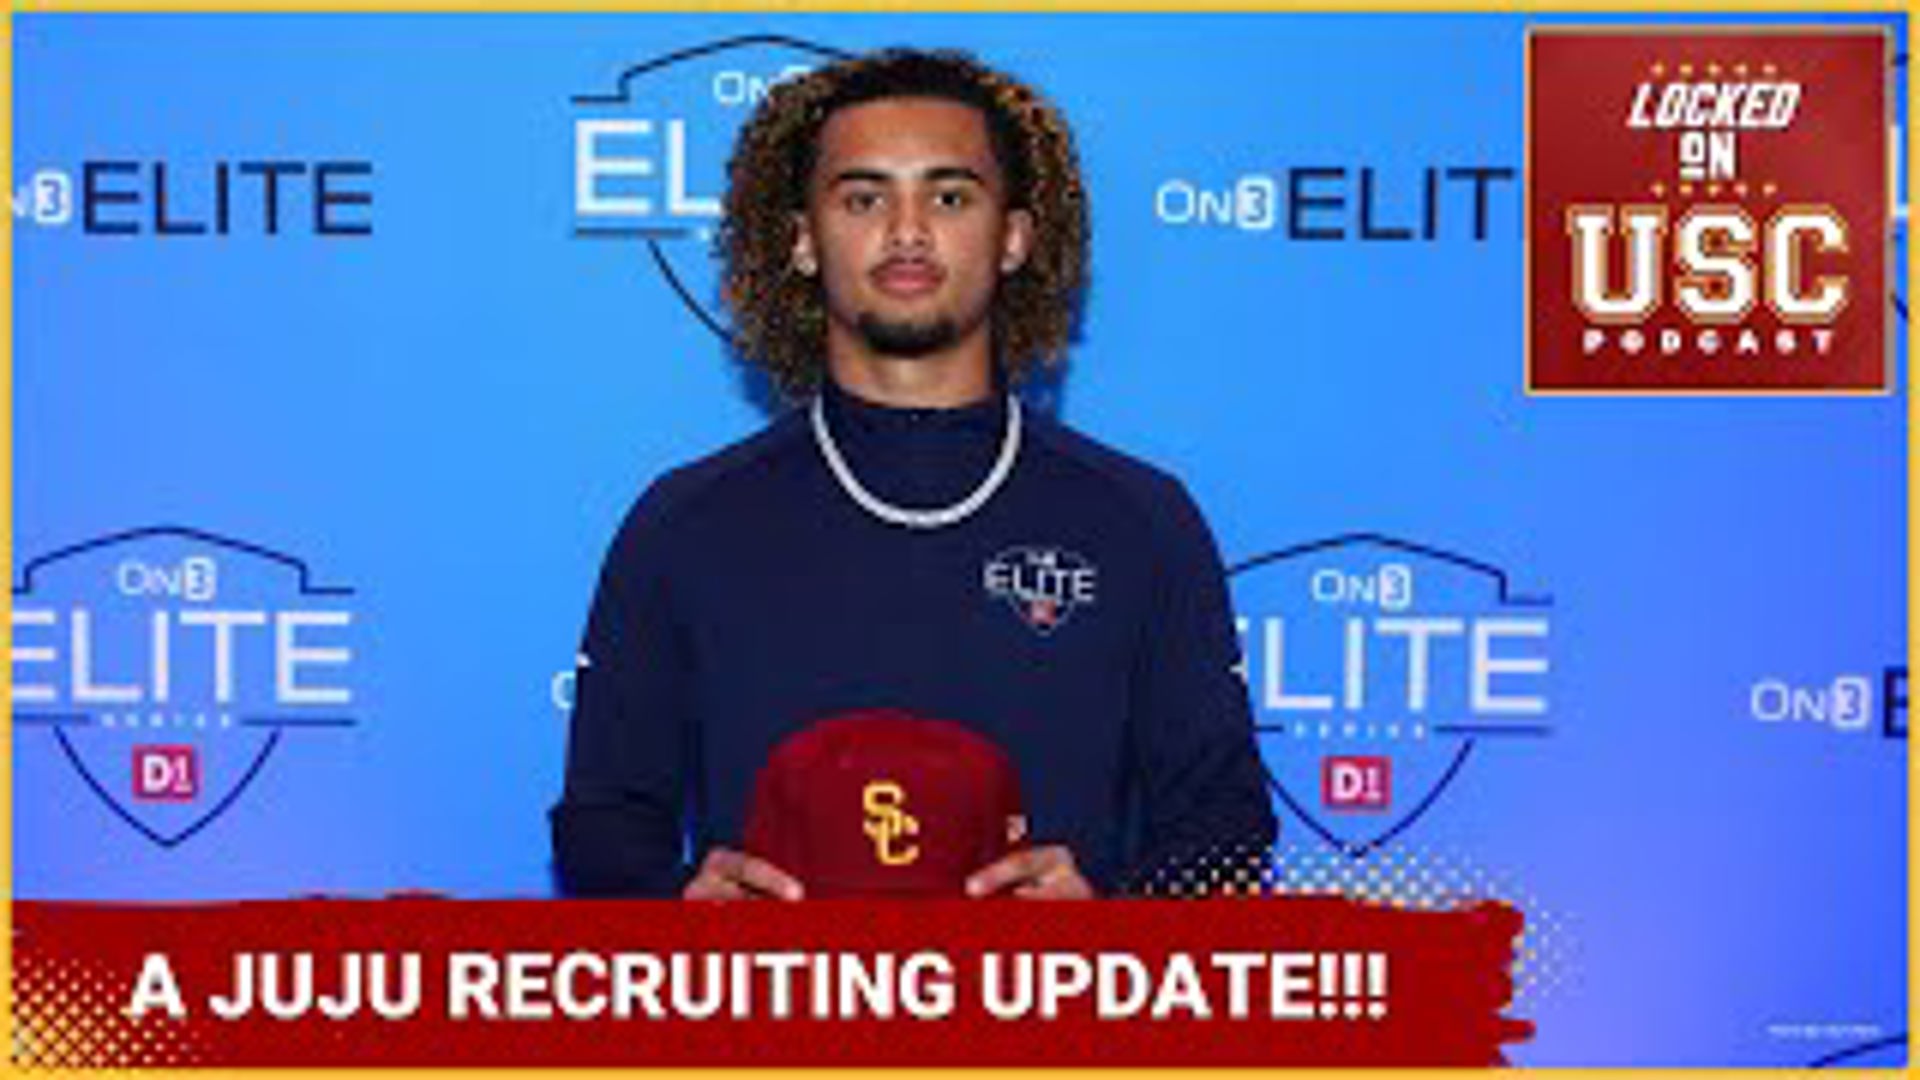 Julian Lewis has one more official visit left on his schedule before he shuts his recruitment down and makes his commitment to USC more official.